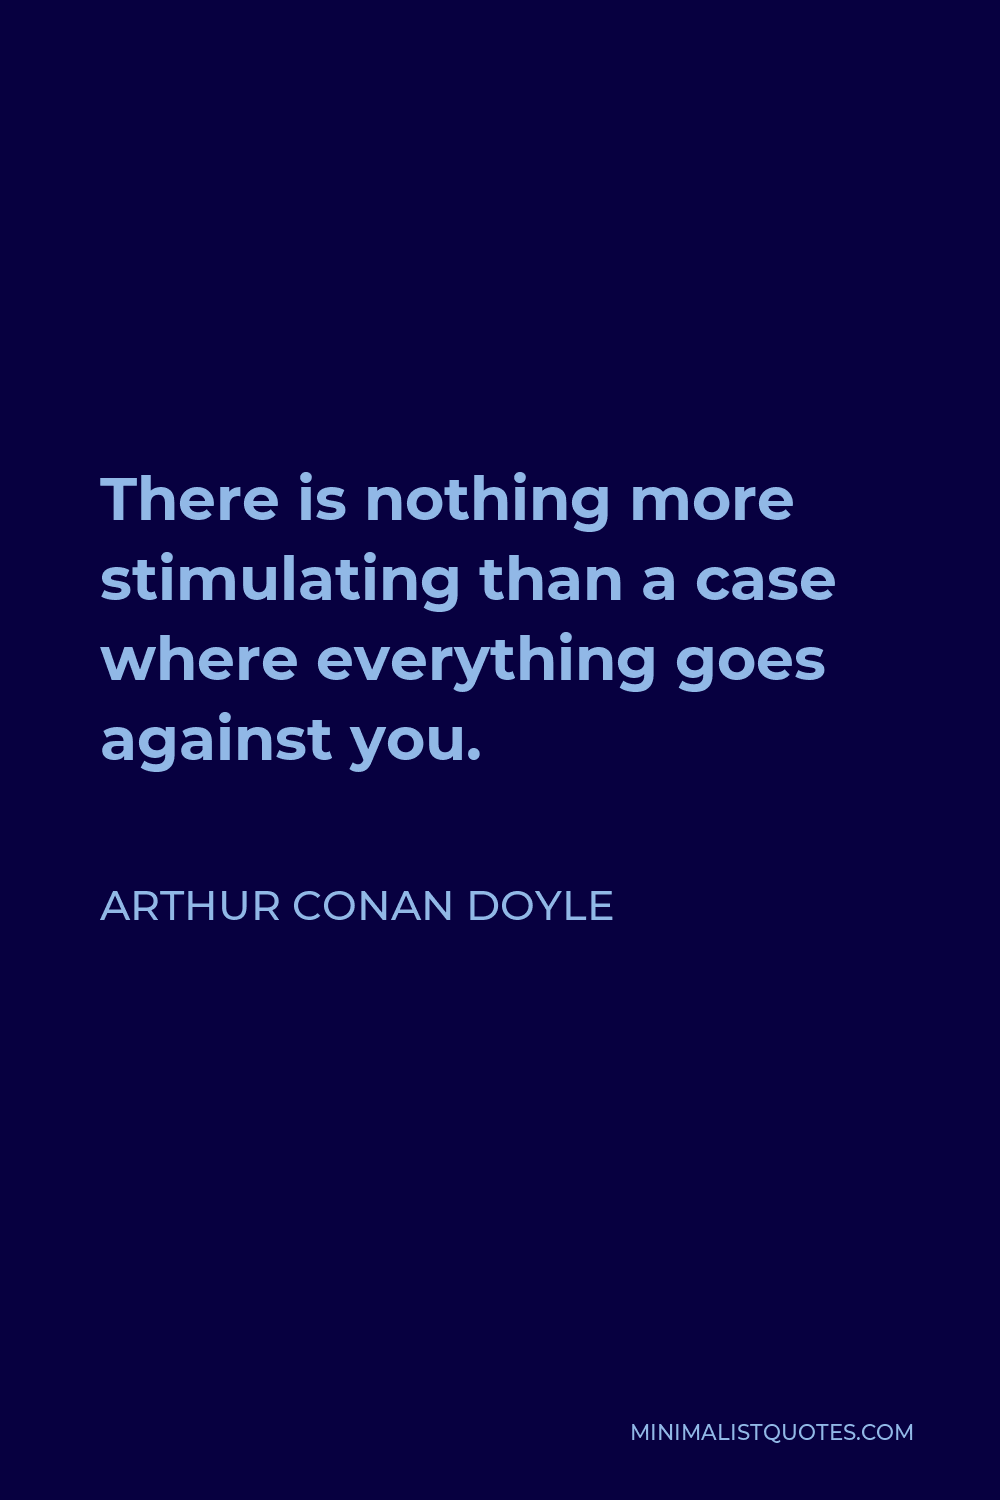 Arthur Conan Doyle Quote - There is nothing more stimulating than a case where everything goes against you.